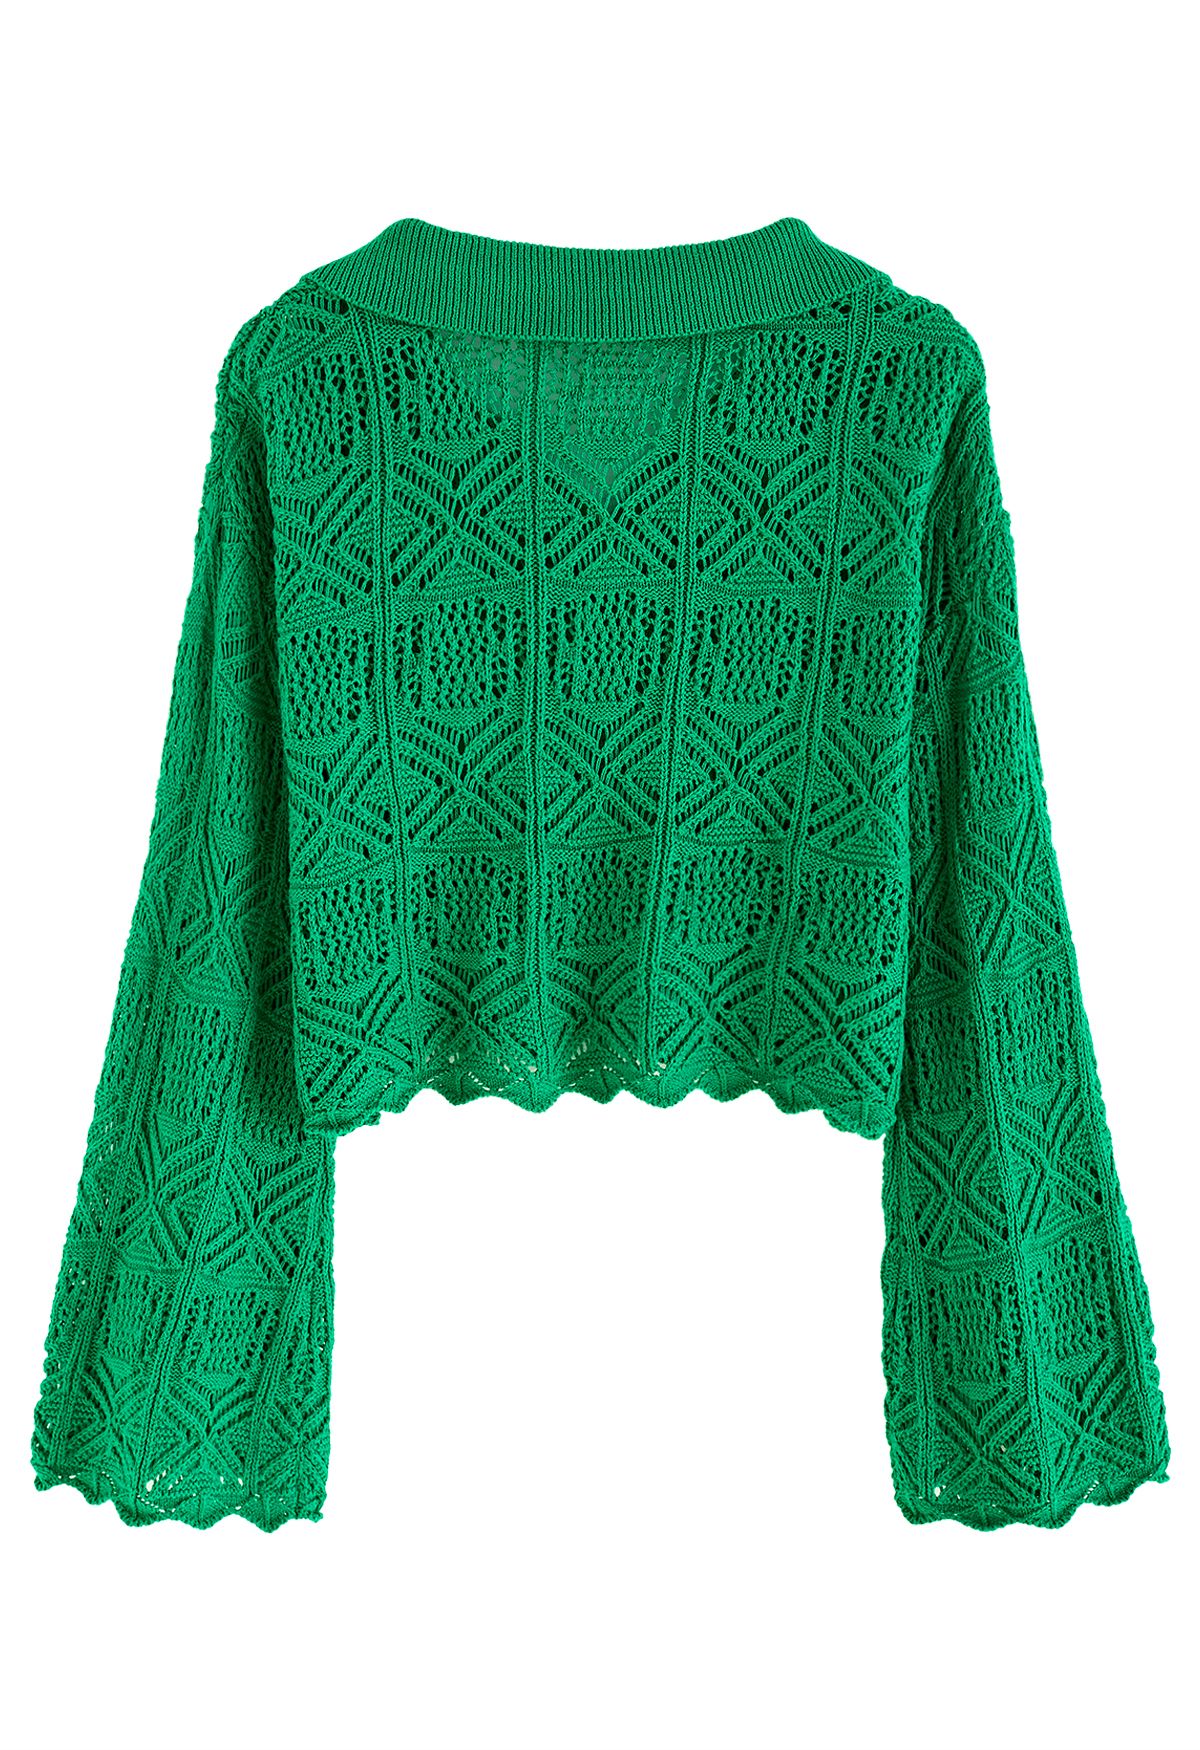 Hollow Out Flare Sleeve Crop Knit Top in Green